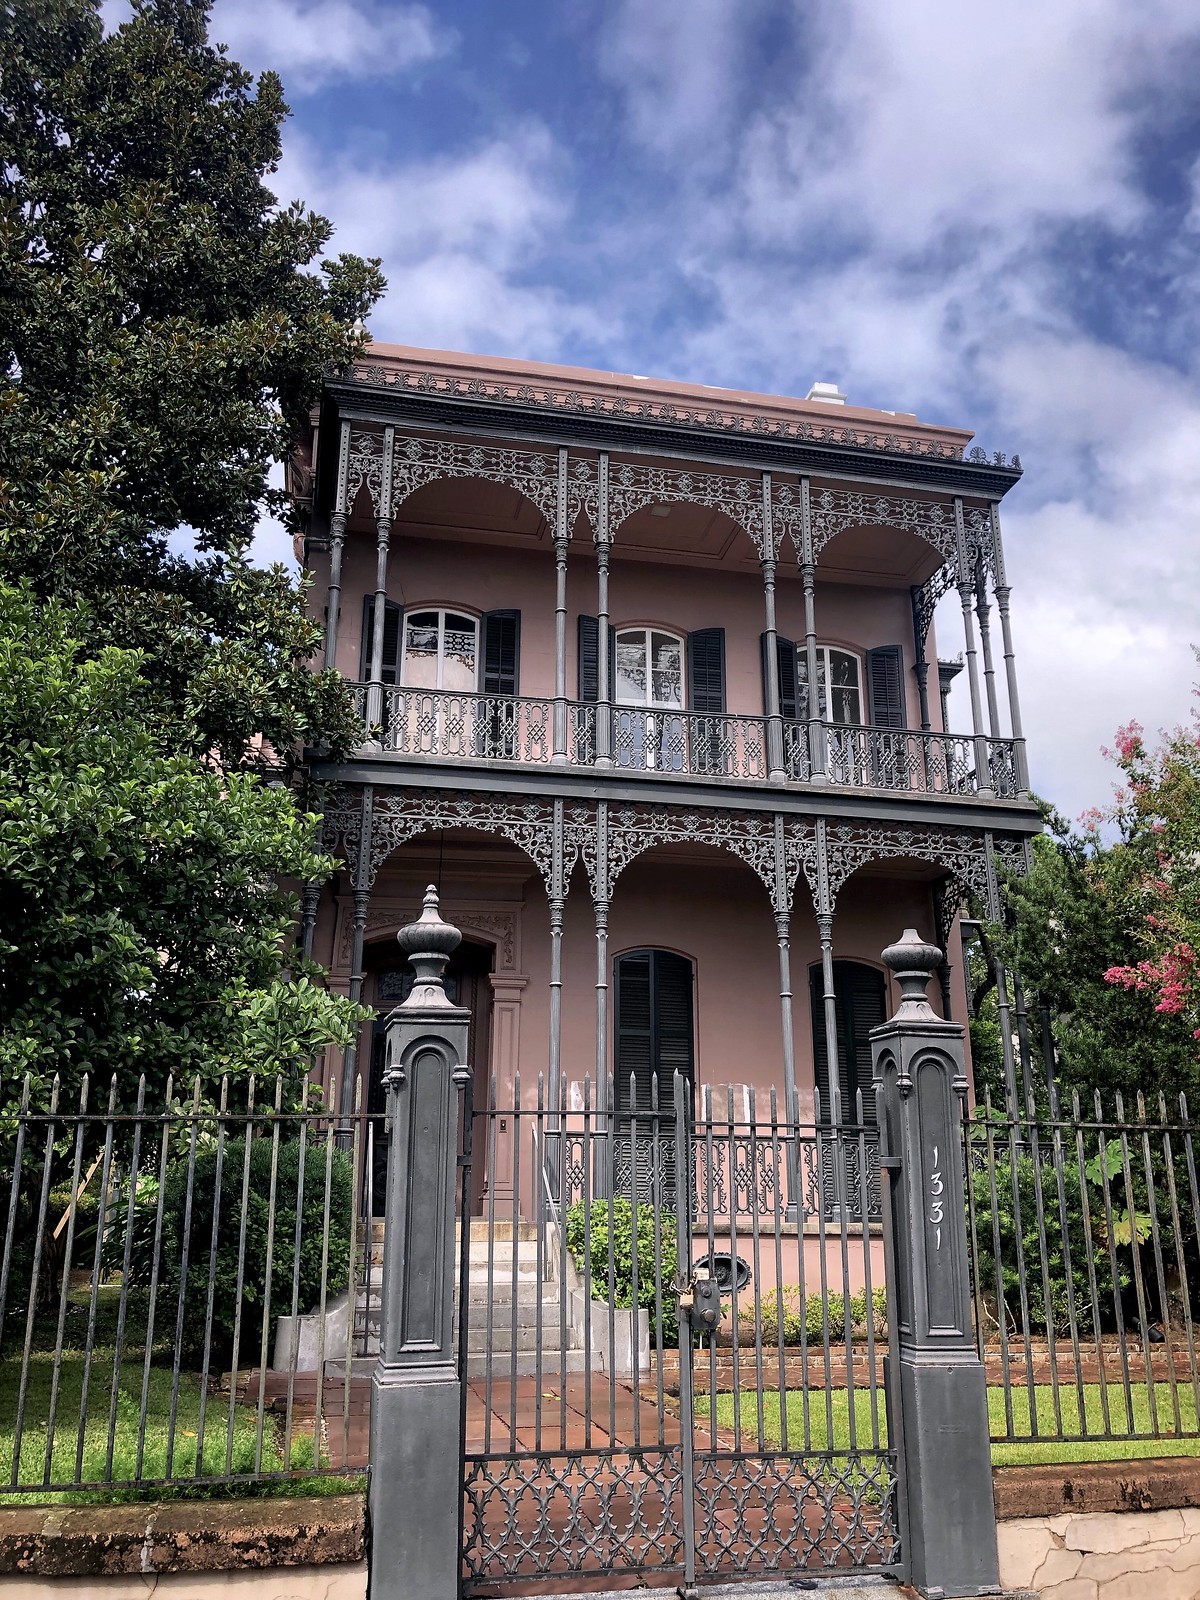 Garden District | How to Spend 48 Hours in New Orleans in the Summer | New Orleans Travel Guide | What to do in New Orleans | 2 Days in New Orleans | Best Things to do in New Orleans | First Timer’s Guide to NOLA | NOLA Travel Guide | 2 Day Itinerary for New Orleans